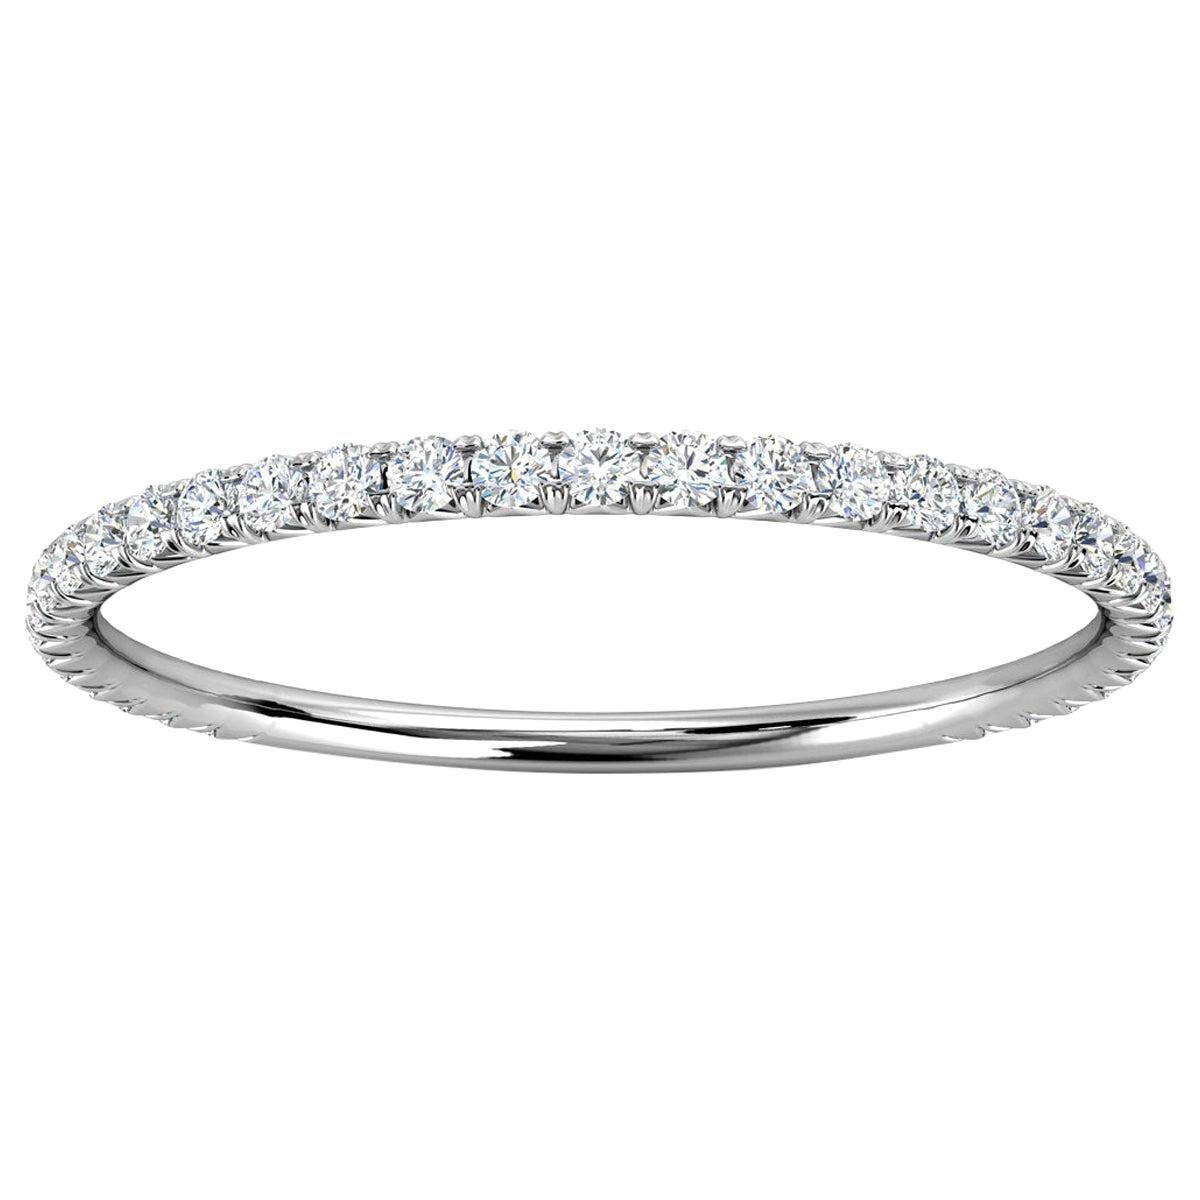 For Sale:  Platinum Petite GIA French Pave Diamond Ring '1/5 Ct. Tw'